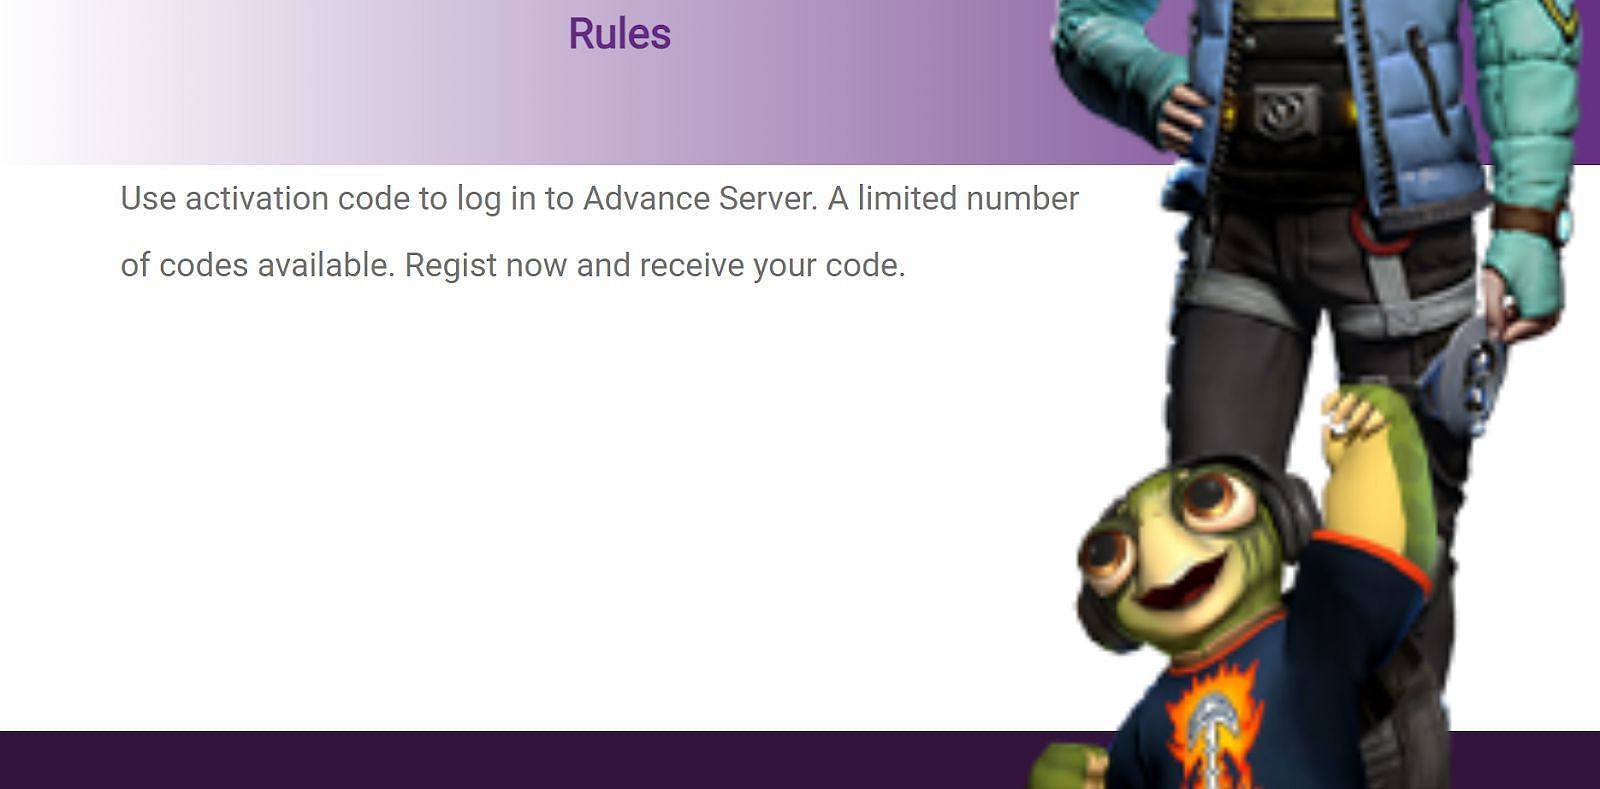 Activation code will be sent to a limited number of users (Image via Garena)